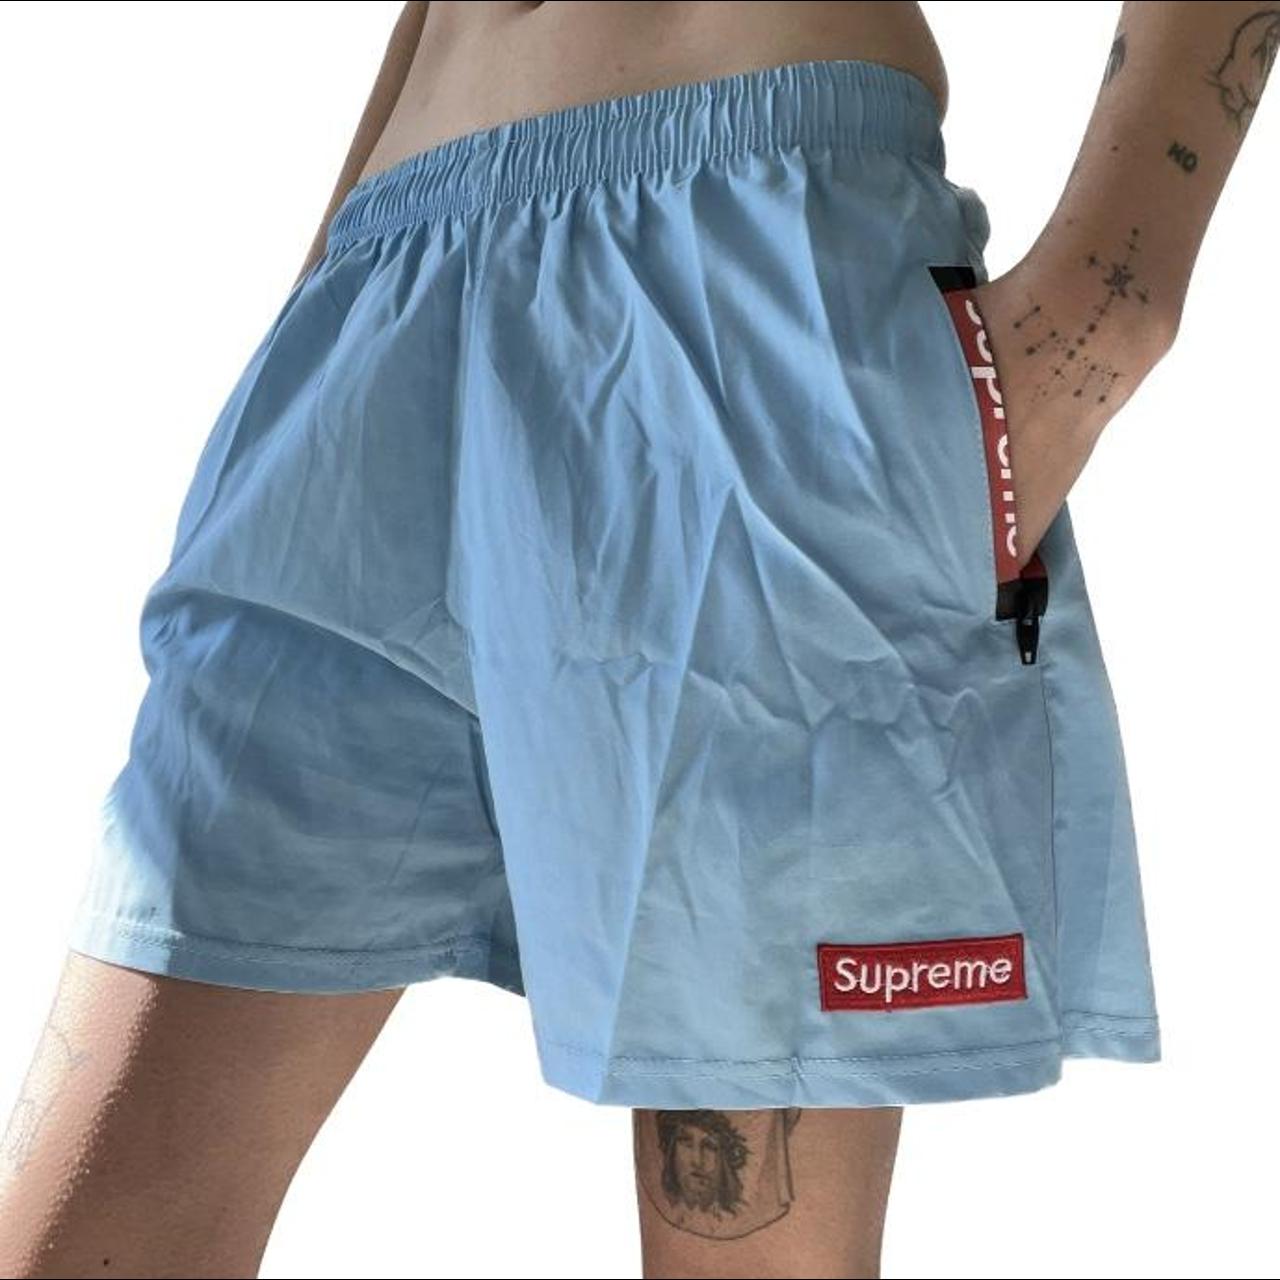 thrifted (bootleg?) supreme shorts perfect for hot